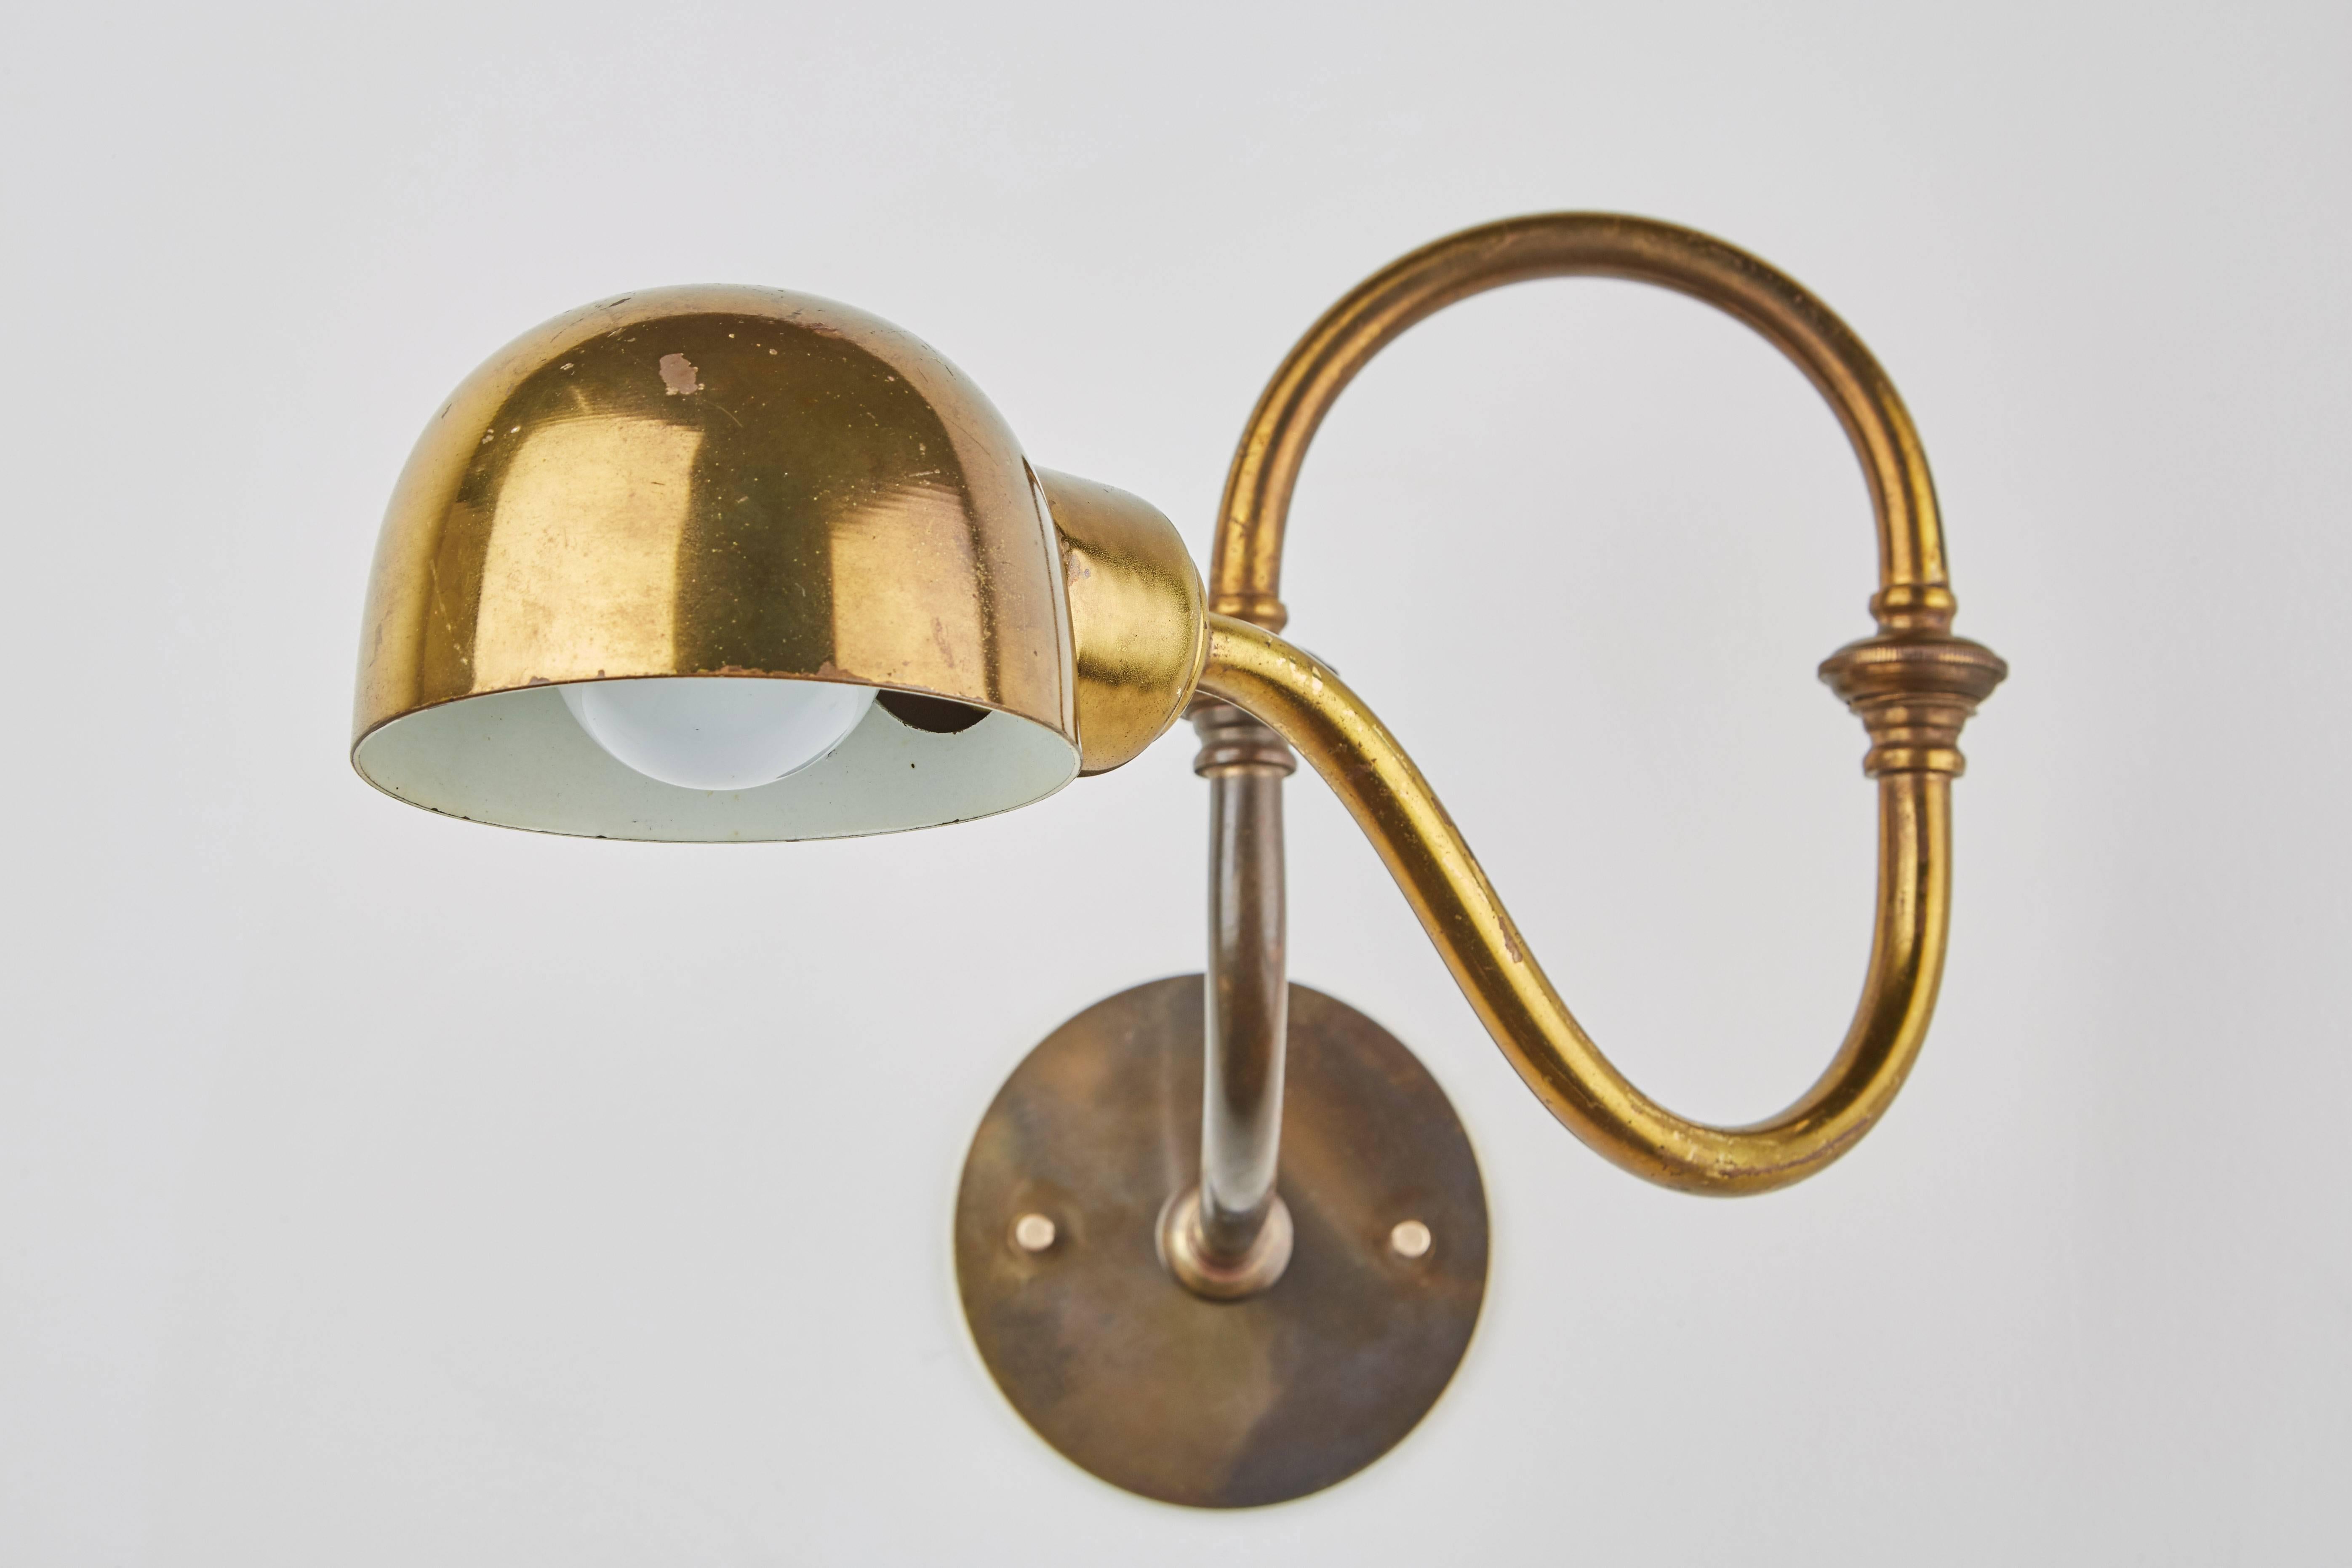 Pair of brass Lp15 Tromba sconces by Luigi Caccia Dominioni for Azucena. Designed in Italy, 1964. Sconce adjust to various positions. Custom backplates. Wired for US junction boxes. Each sconce takes one E27, 75w maximum bulb.